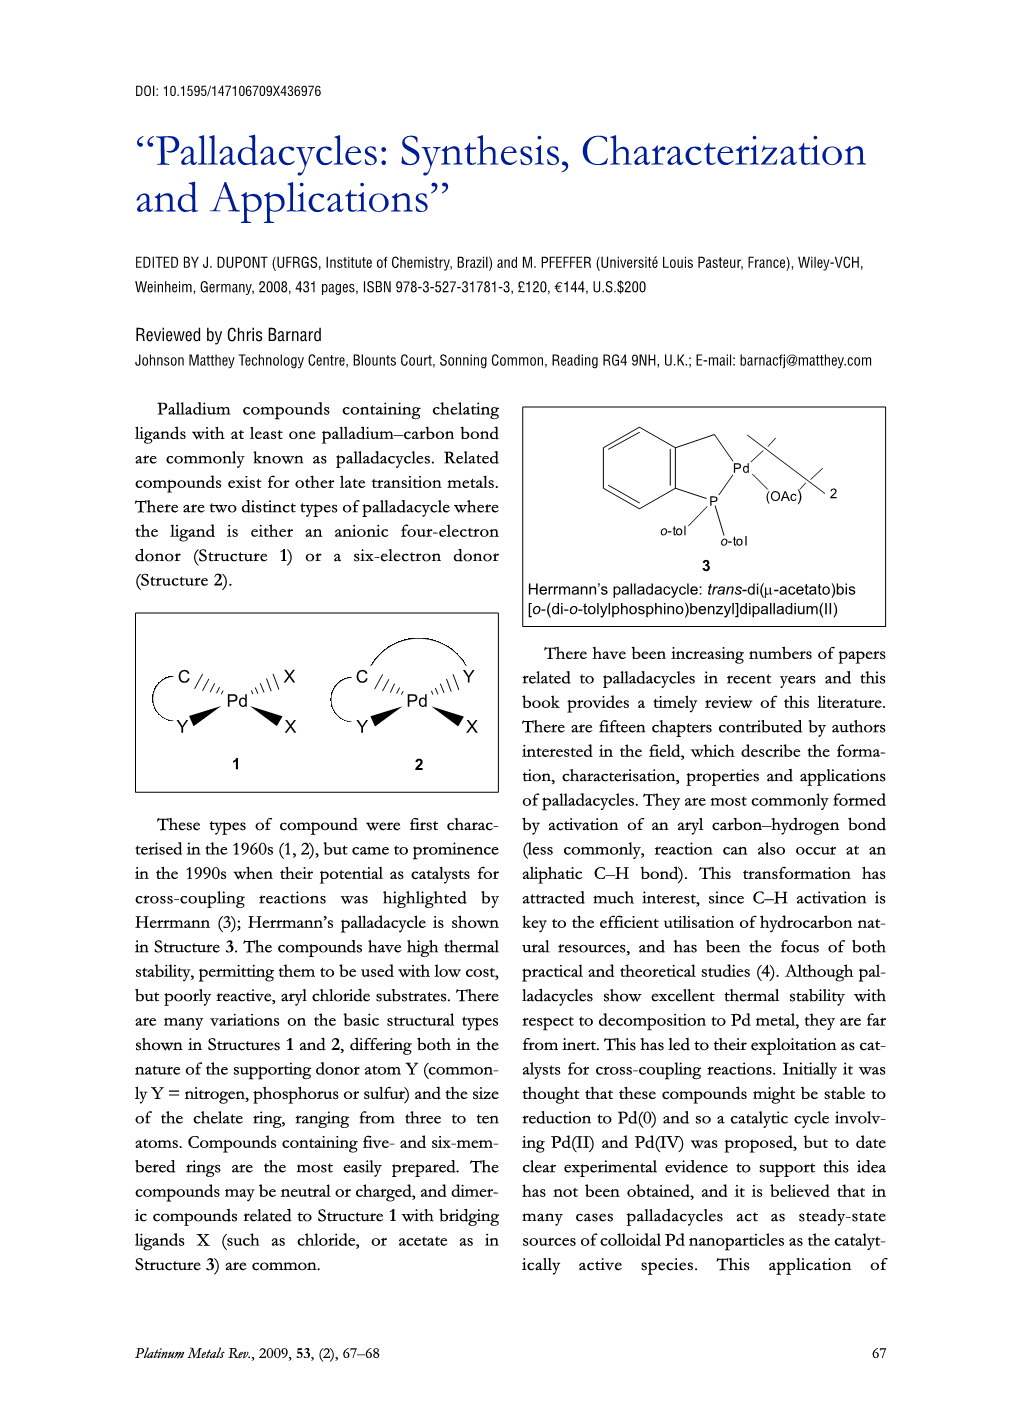 “Palladacycles: Synthesis, Characterization and Applications”